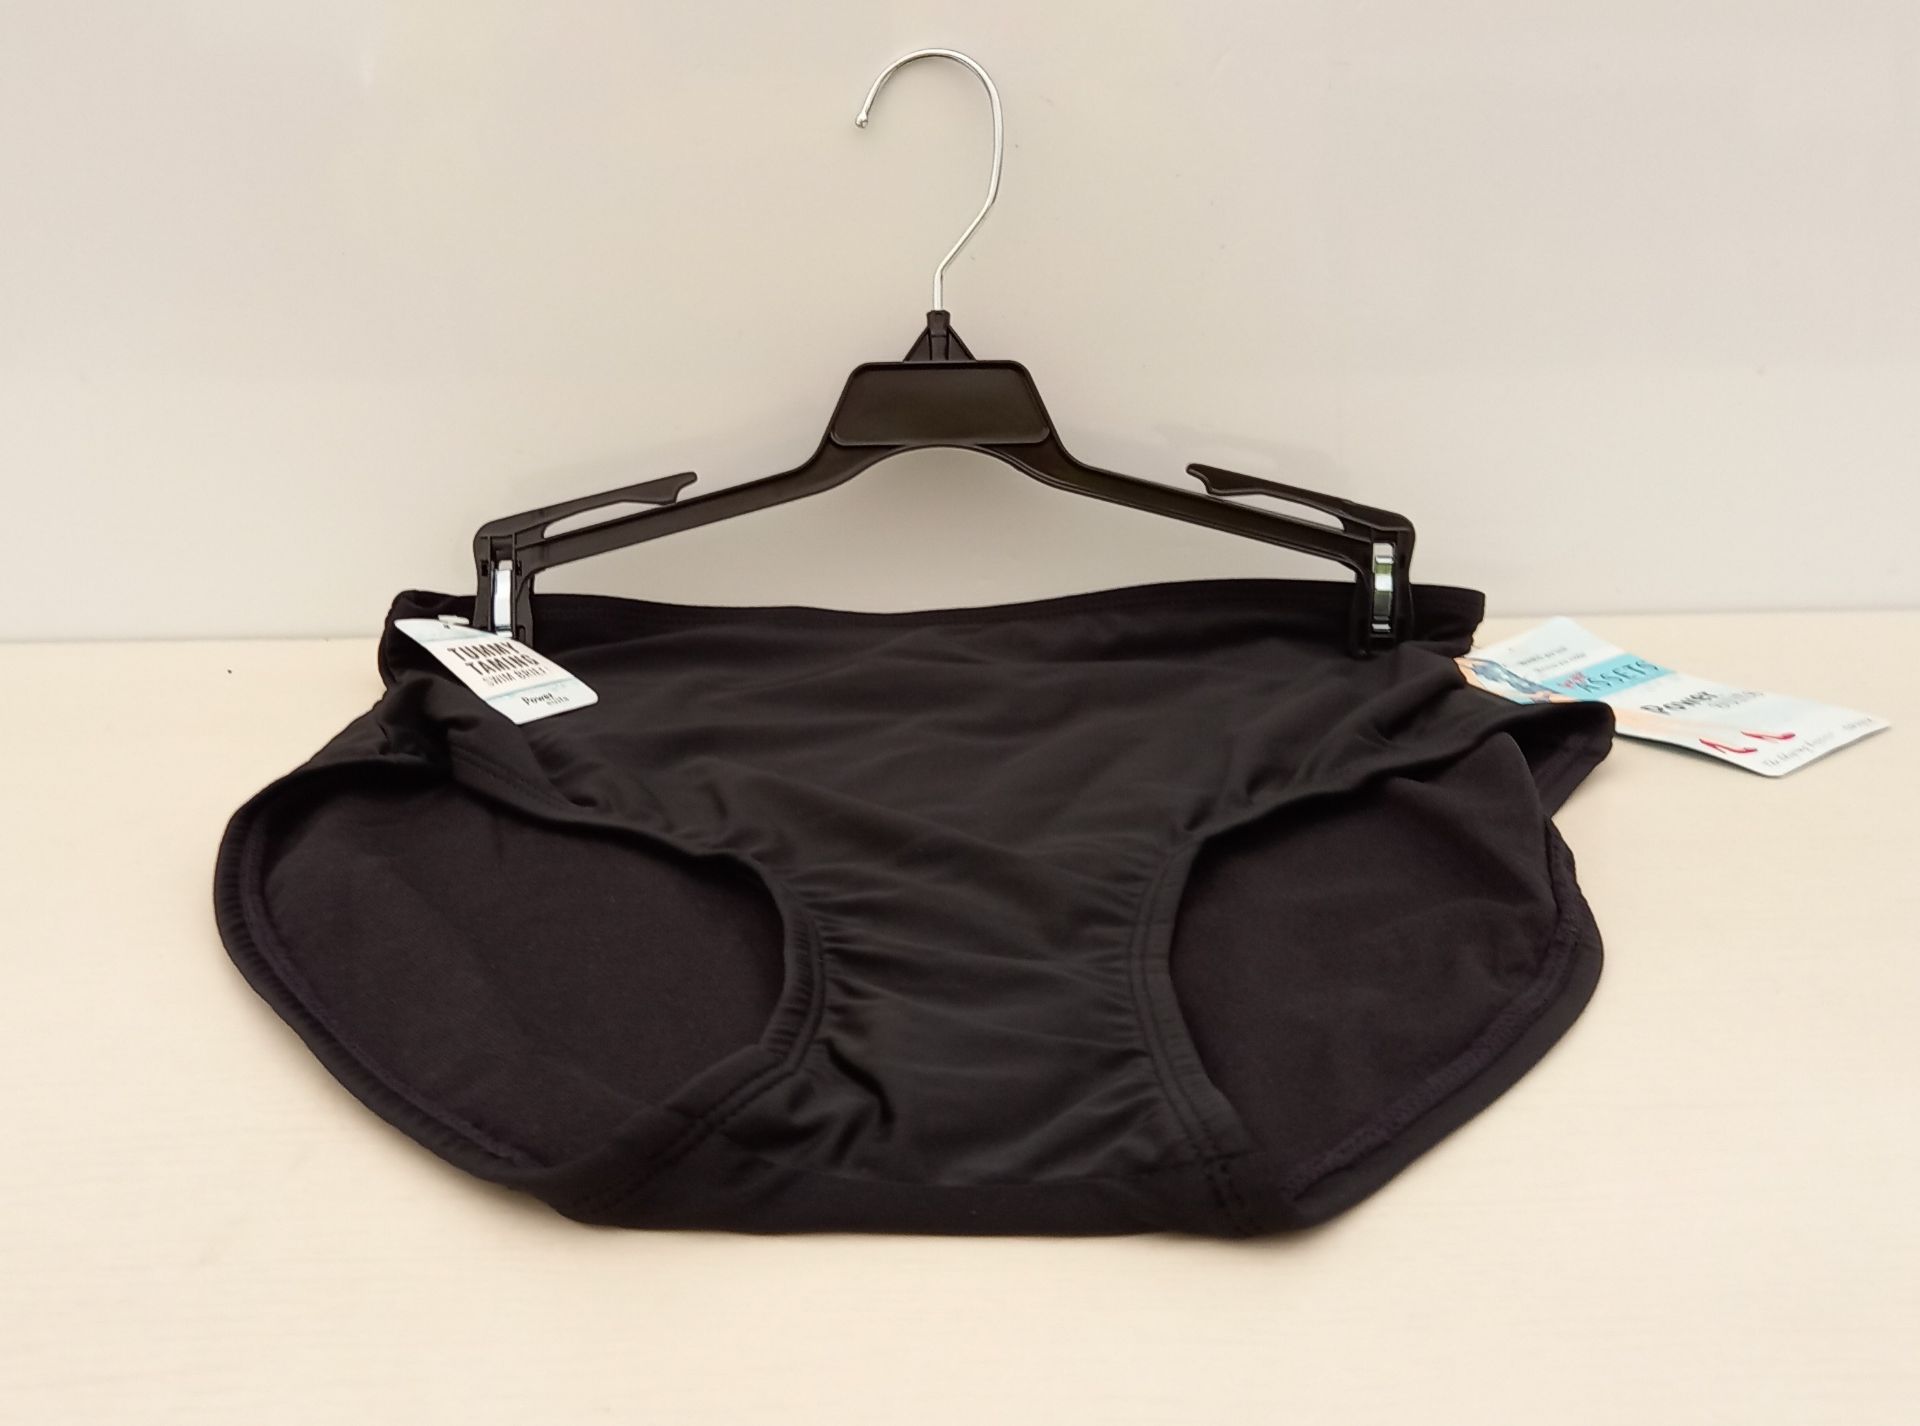 20 X BRAND NEW SPANX FULL COVERAGE BOTTOMS IN JET BLACK SIZE SMALL RRP $29.99 (TOTAL RRP $599.80)